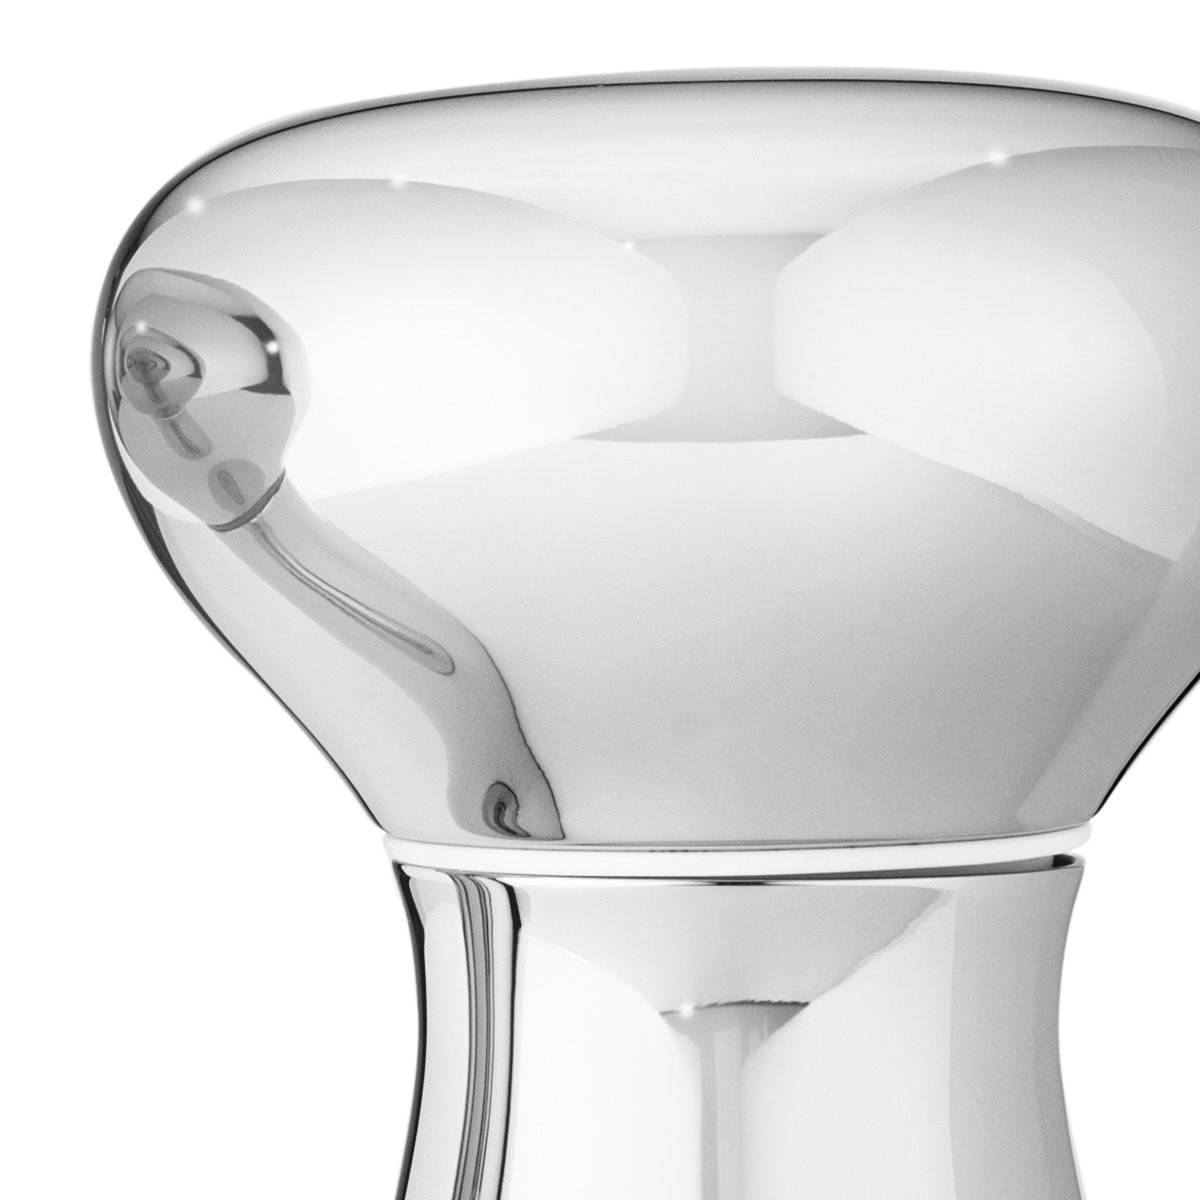 https://res.cloudinary.com/georgjensen/image/upload/f_auto,dpr_2/w_auto,c_scale/products/images/hi-res/3586040-ALFREDO-salt-pepper-small-detail-2?_i=AG